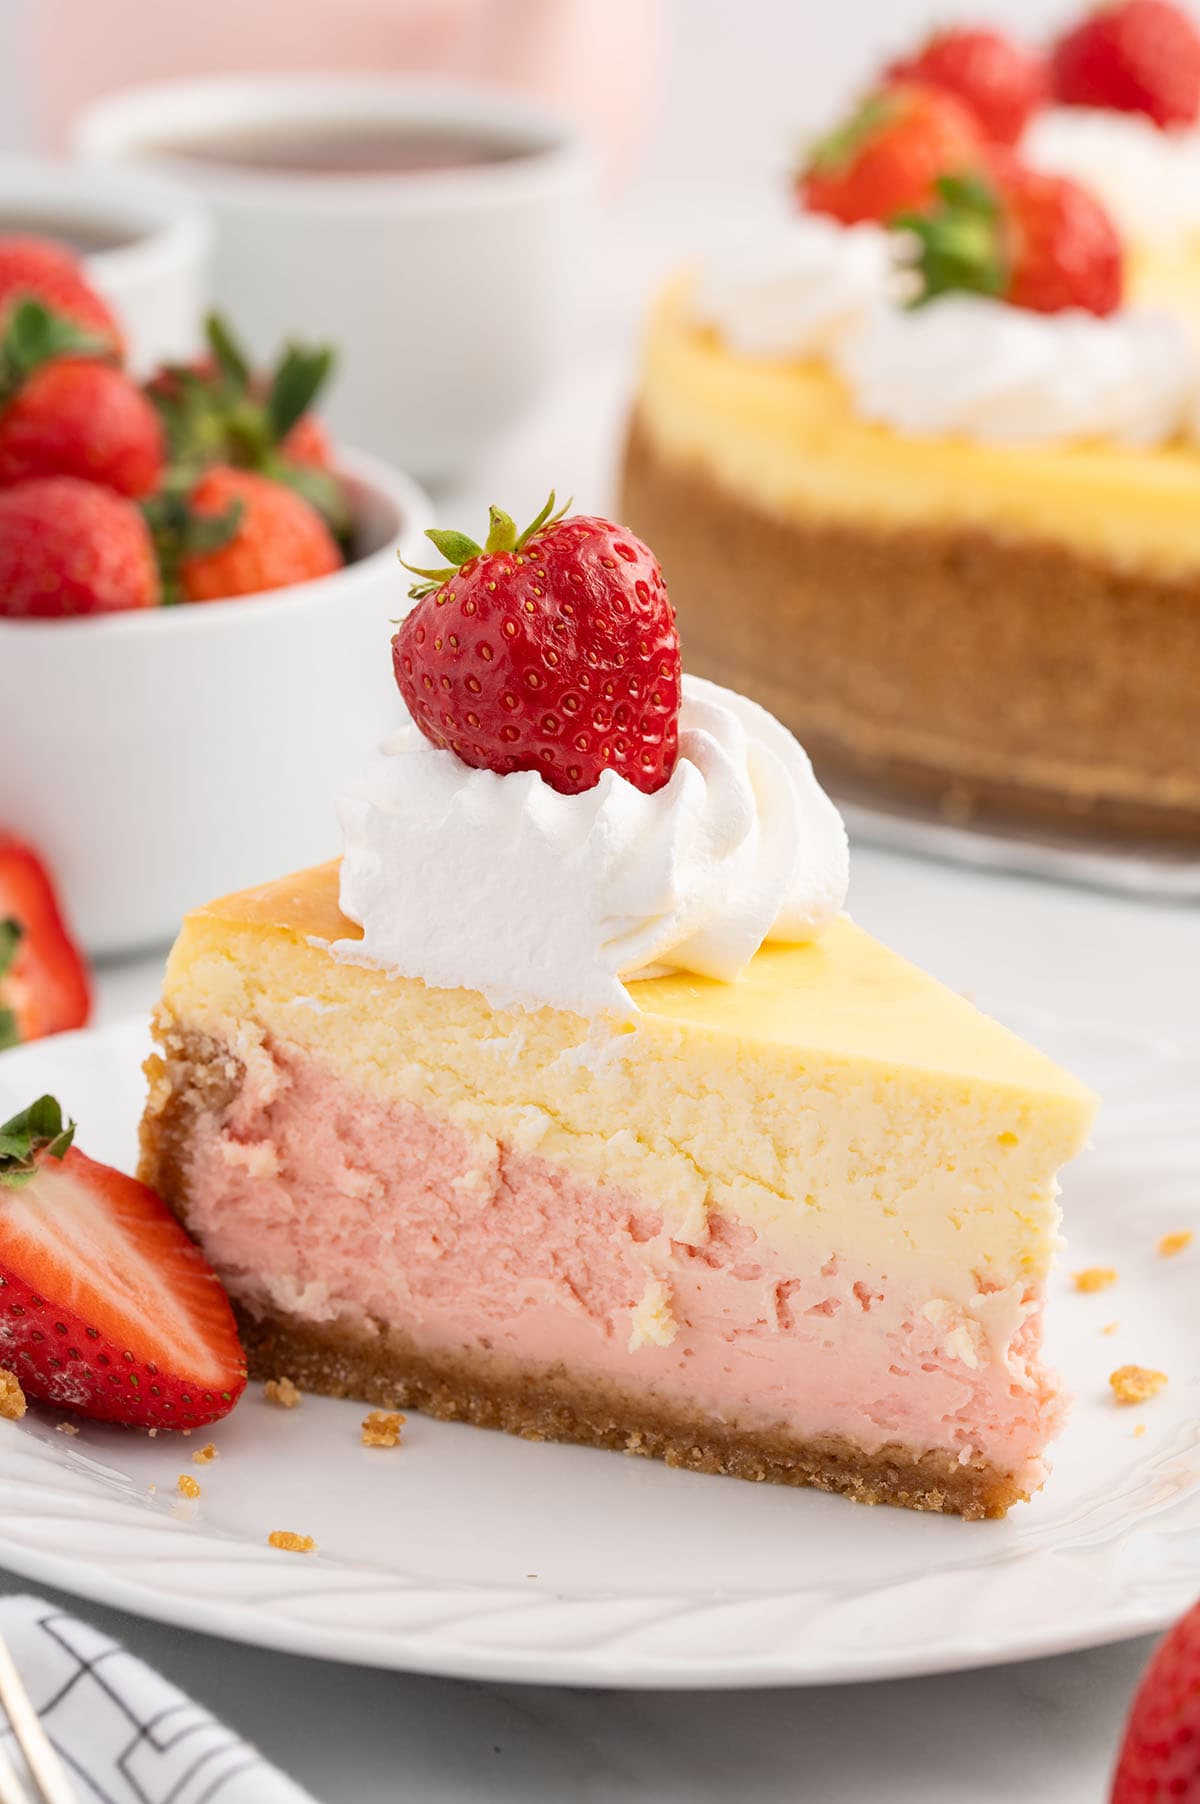 a slice of Strawberries and Cream Cheesecake on the plate.